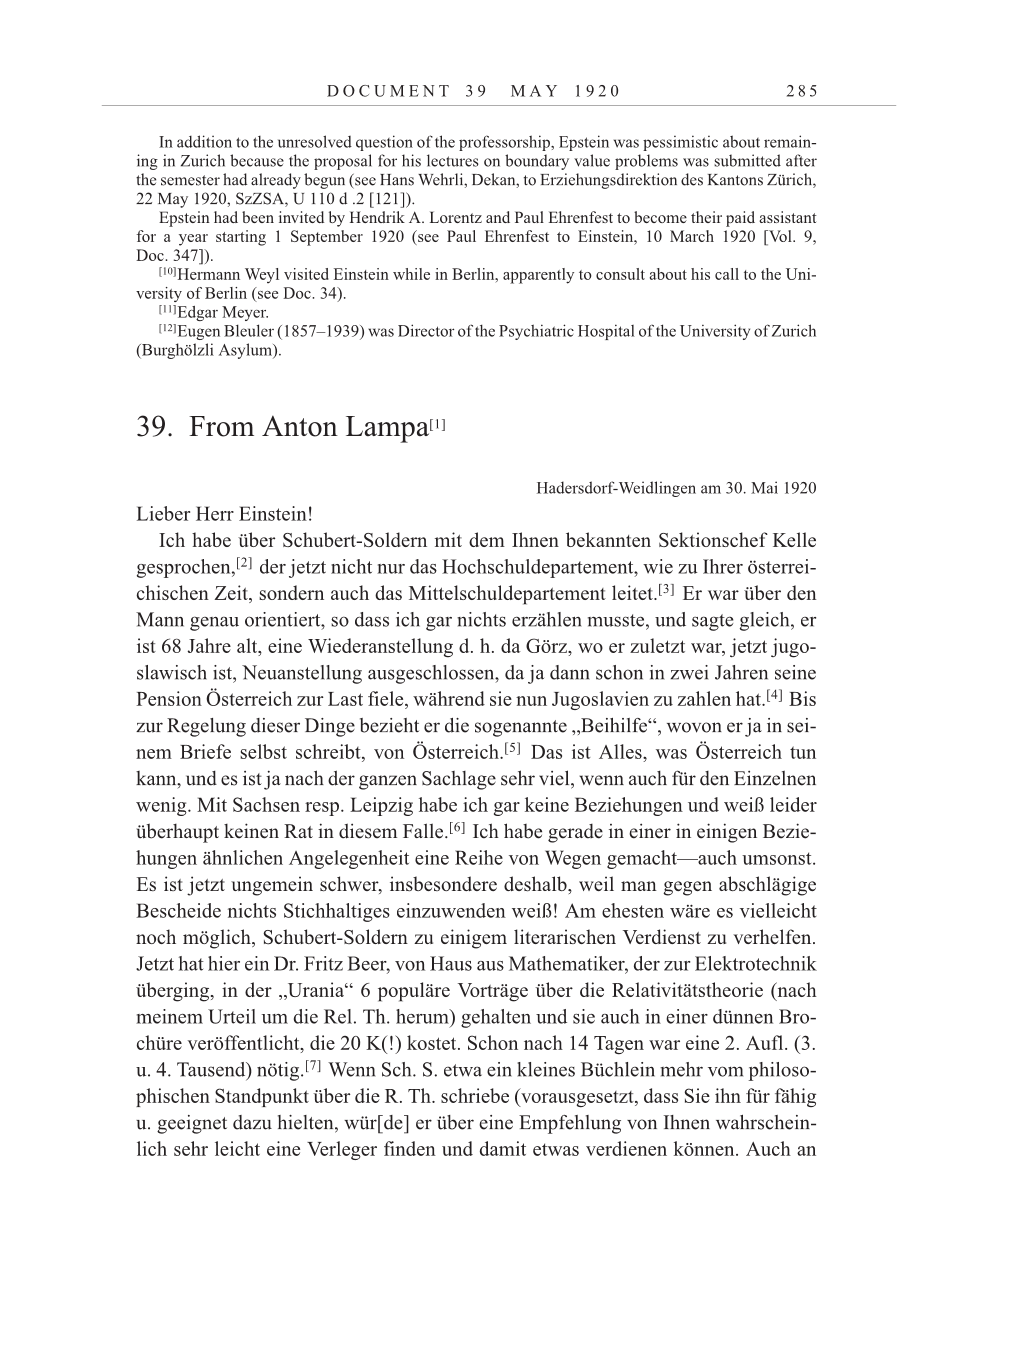 Volume 10: The Berlin Years: Correspondence May-December 1920 / Supplementary Correspondence 1909-1920 page 285